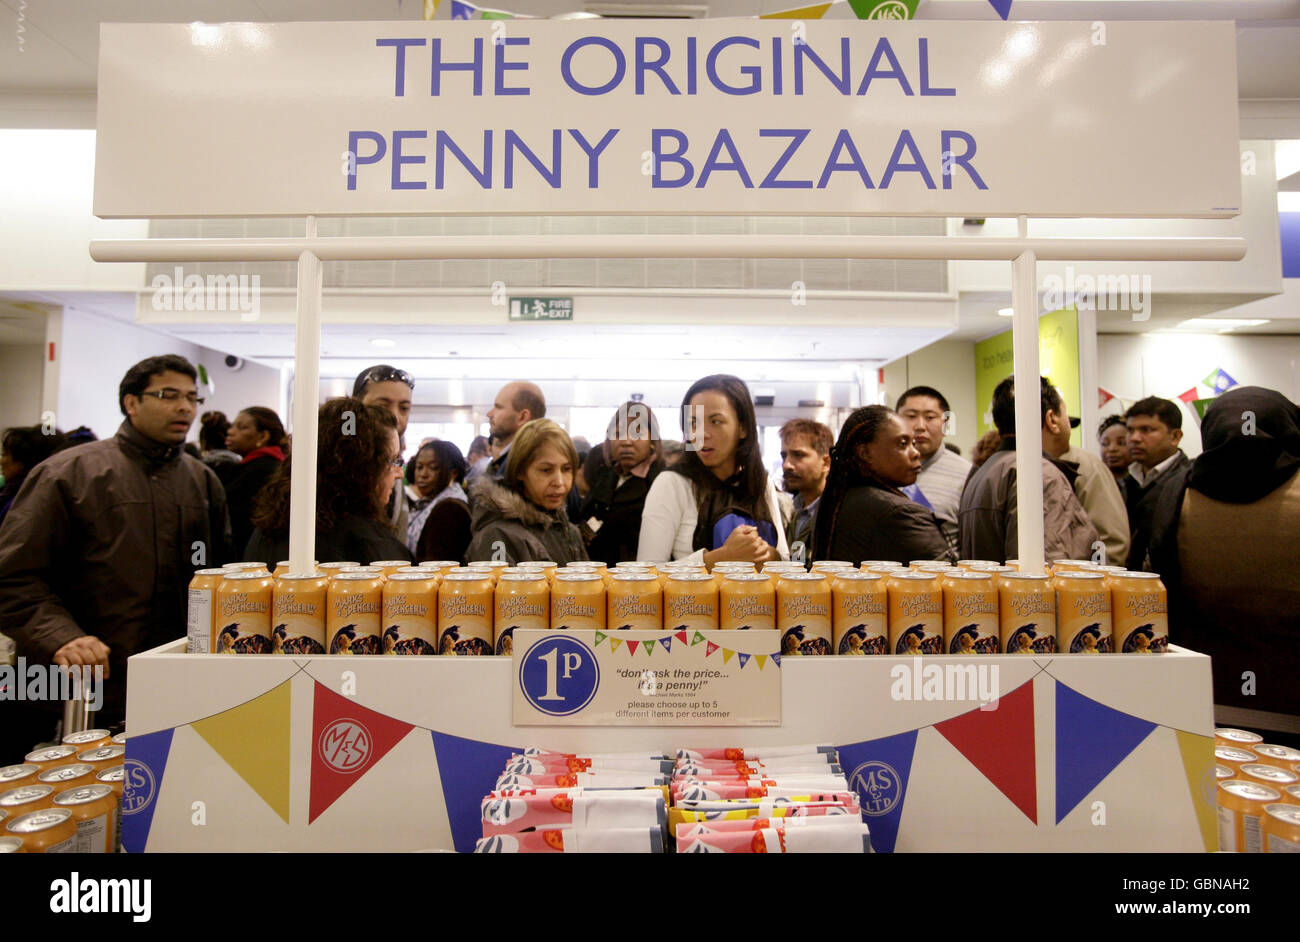 Customers queue for an exclusive range of M&S (Marks & Spencer) products priced at just one penny, to mark the store's 125th Birthday celebrations with the opening of the Original Penny Bazaar at the company's flagship store in Marble Arch, central London. Stock Photo